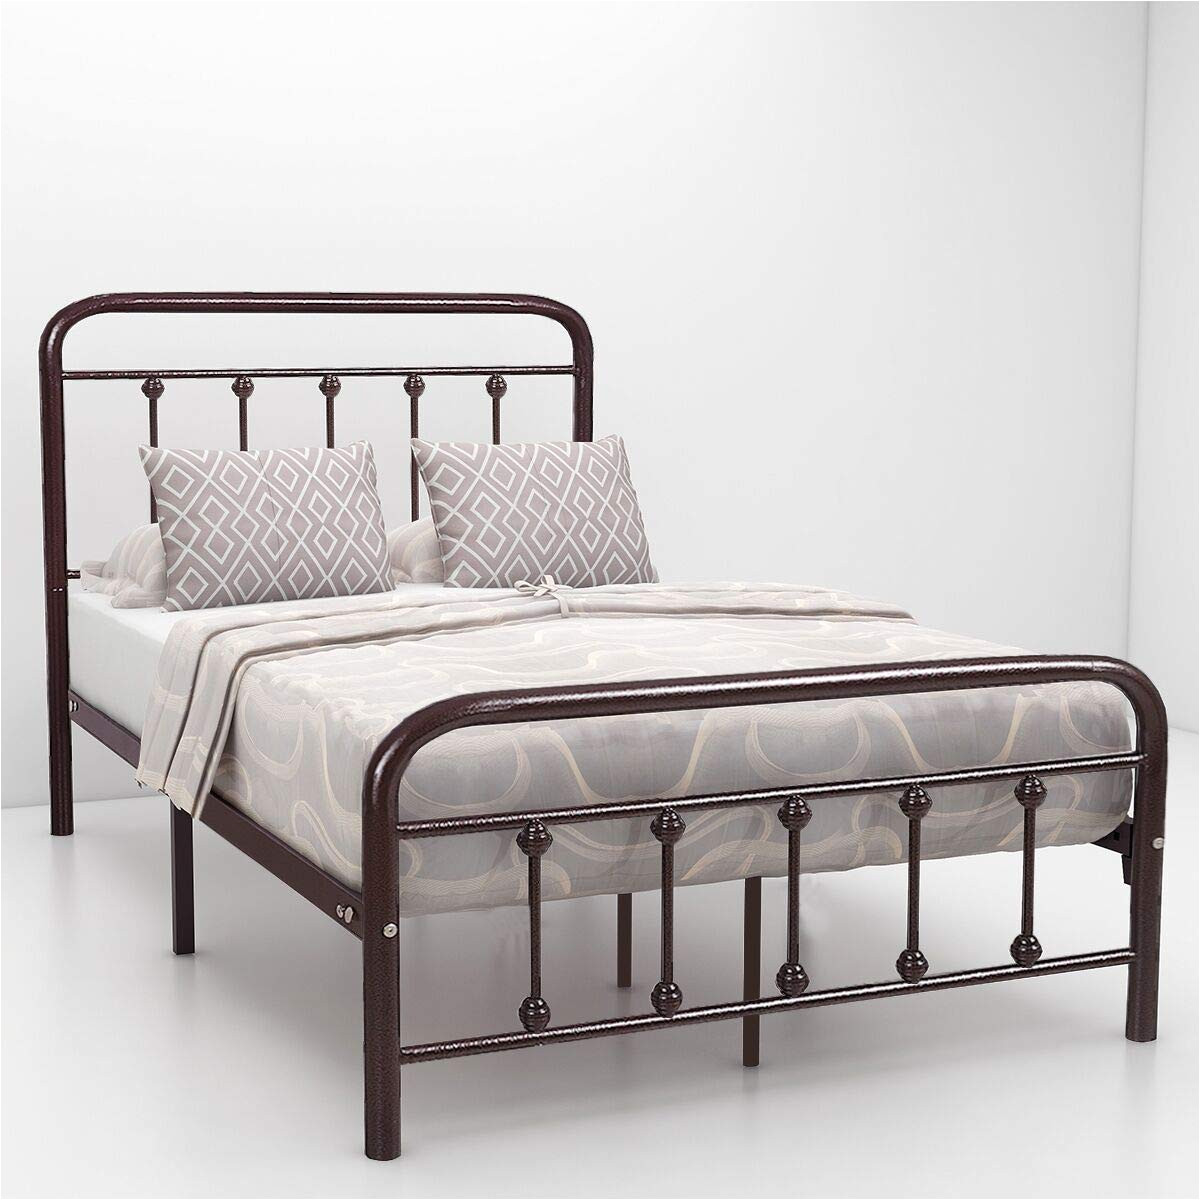 amazon com homerecommend dark bronze metal bed frame platform with headboard and footboard box spring replacement mattress foundation heavy duty steel